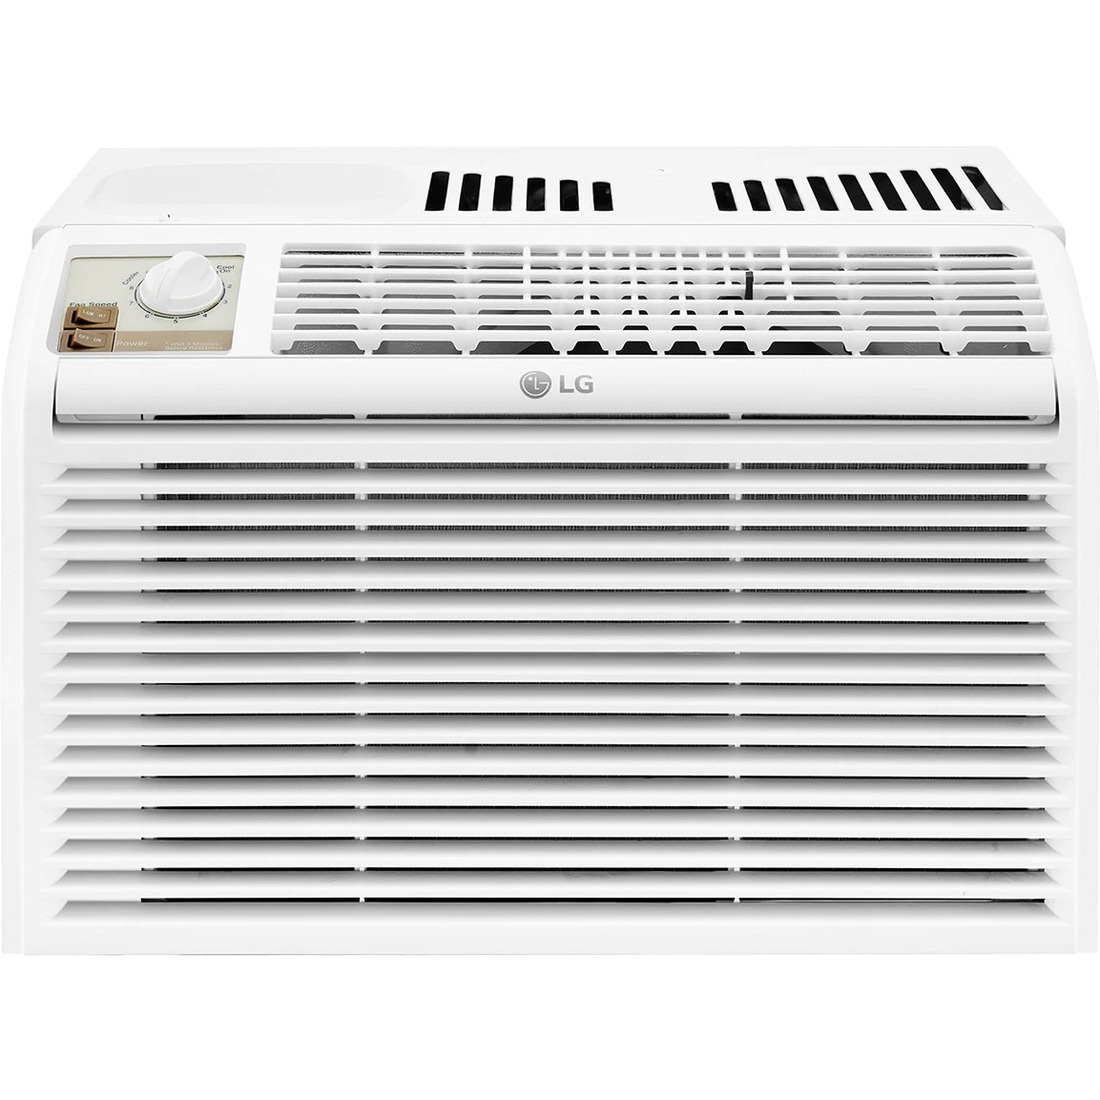 LG 5,000 115V BTU Window Air Conditioner, Cools 150 Sq.Ft. (10' x 15' Room Size) - image 1 of 10